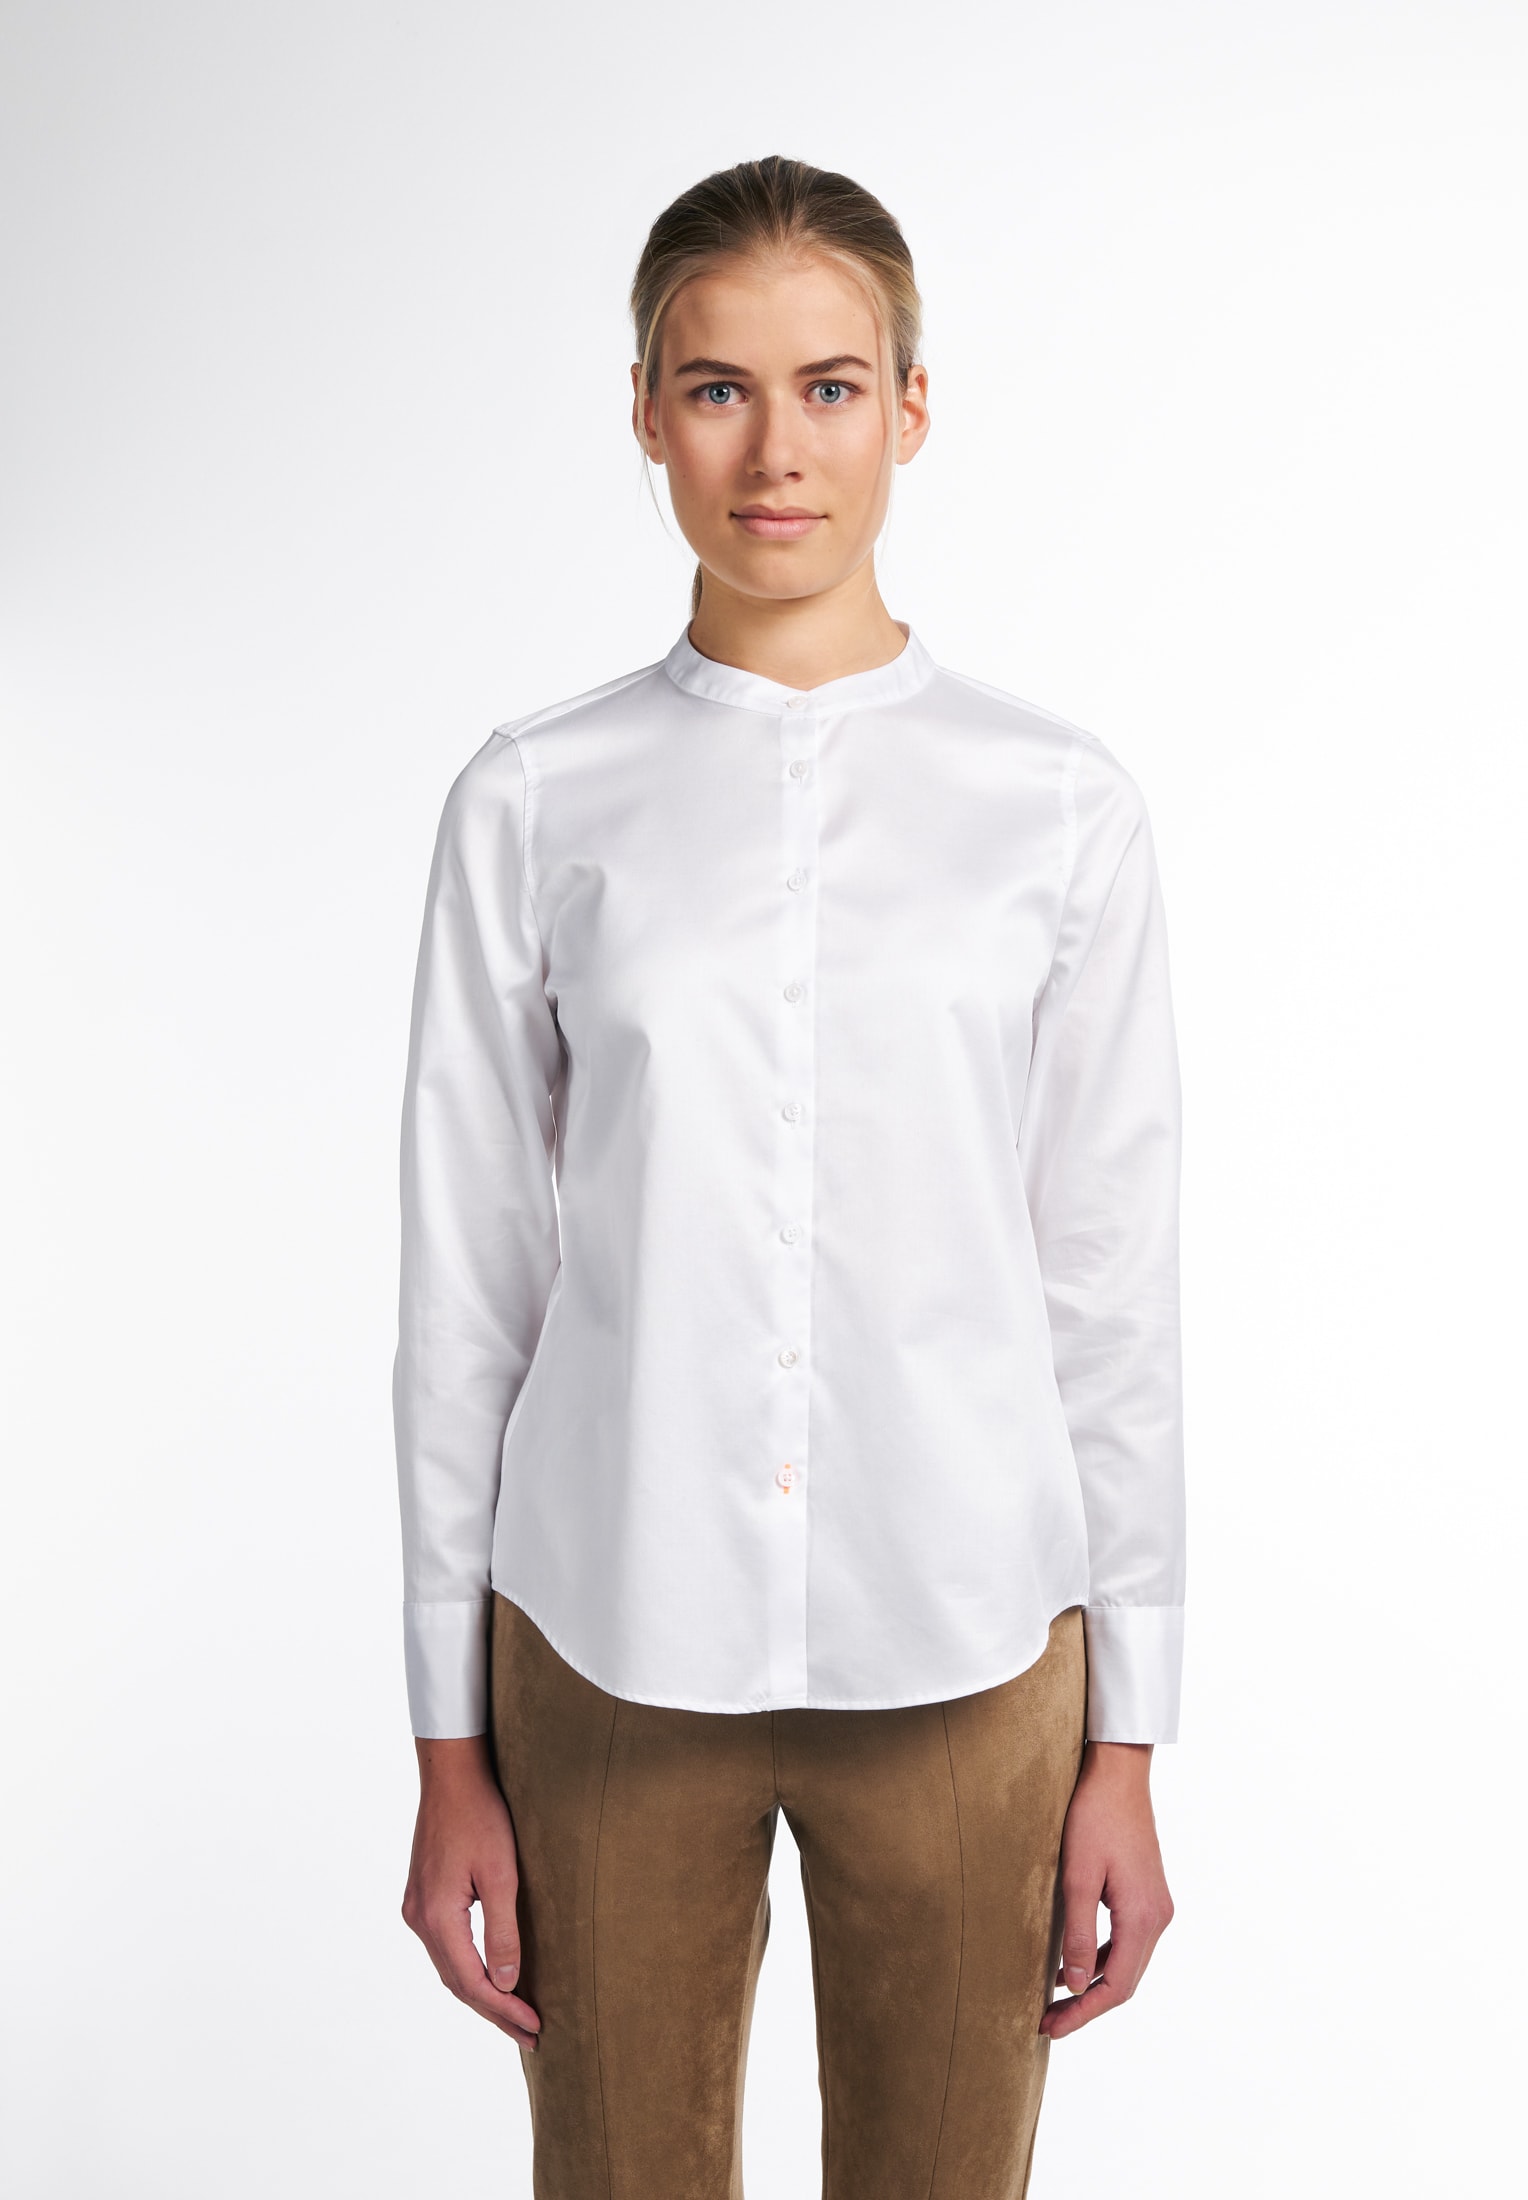 Soft Luxury Shirt off-white | | | | 2BL03742-00-02-38-1/1 Bluse in unifarben off-white Langarm 38